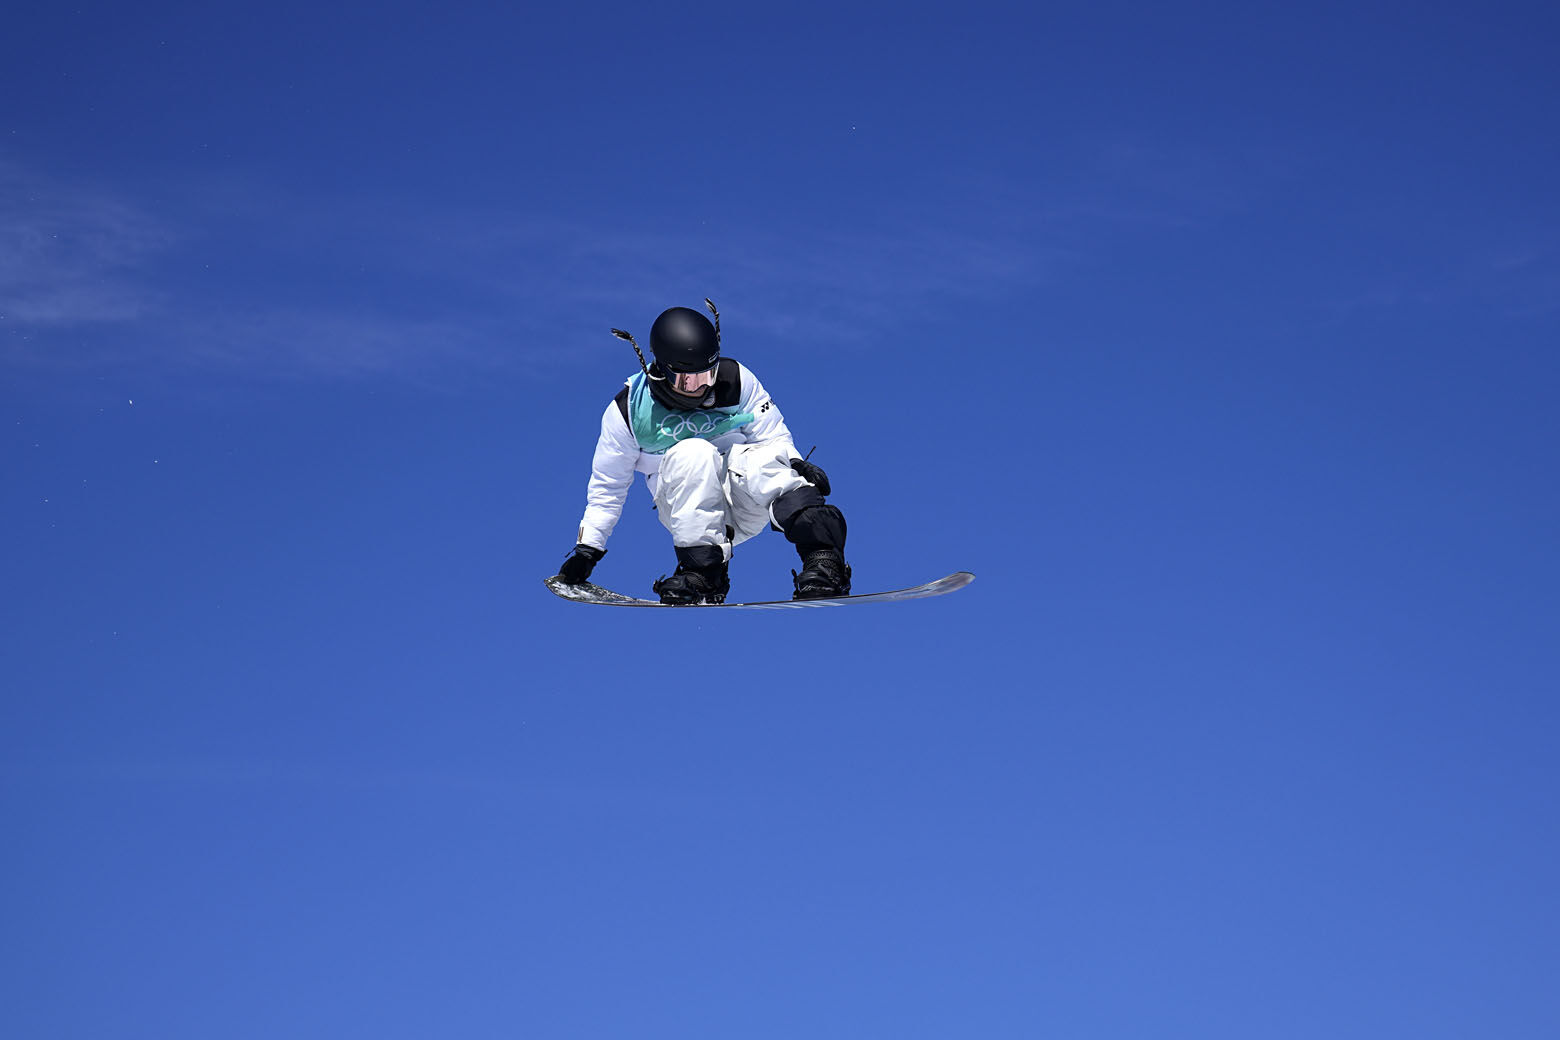 <p>Hiroaki Kunitake of Japan competes during the men&#8217;s snowboard big air qualifications of the 2022 Winter Olympics, Monday, Feb. 14, 2022, in Beijing.</p>
